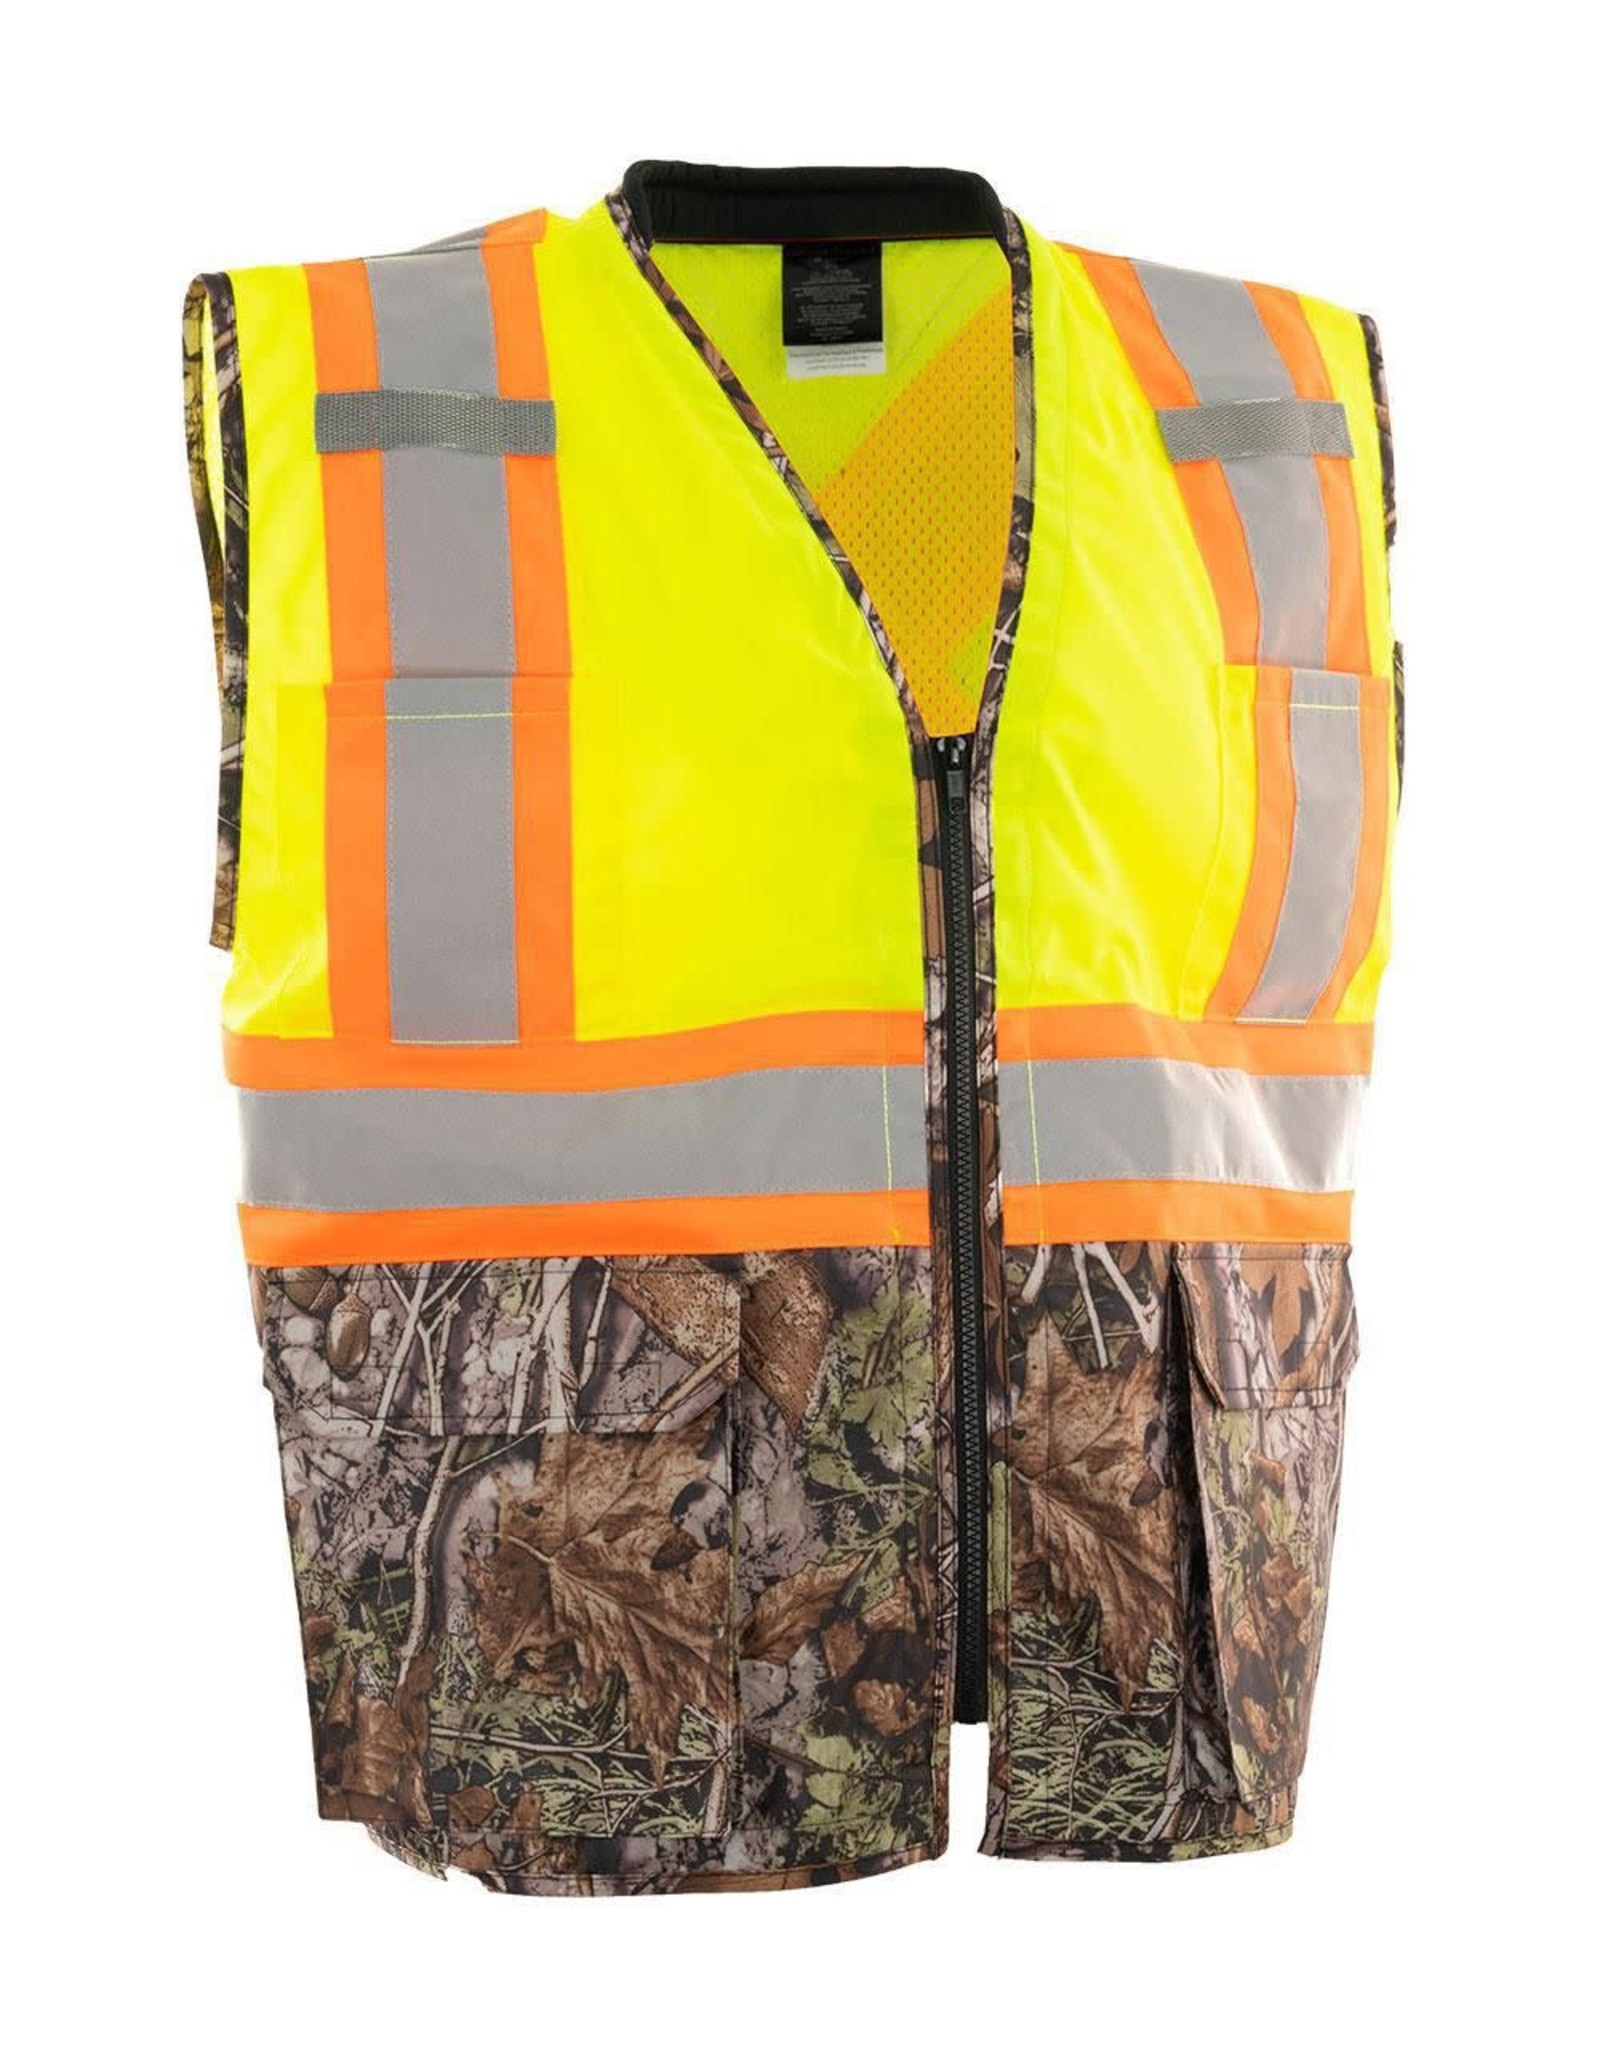 Forcefield Forcefield Deluxe Safety Vest, Lime/Camo